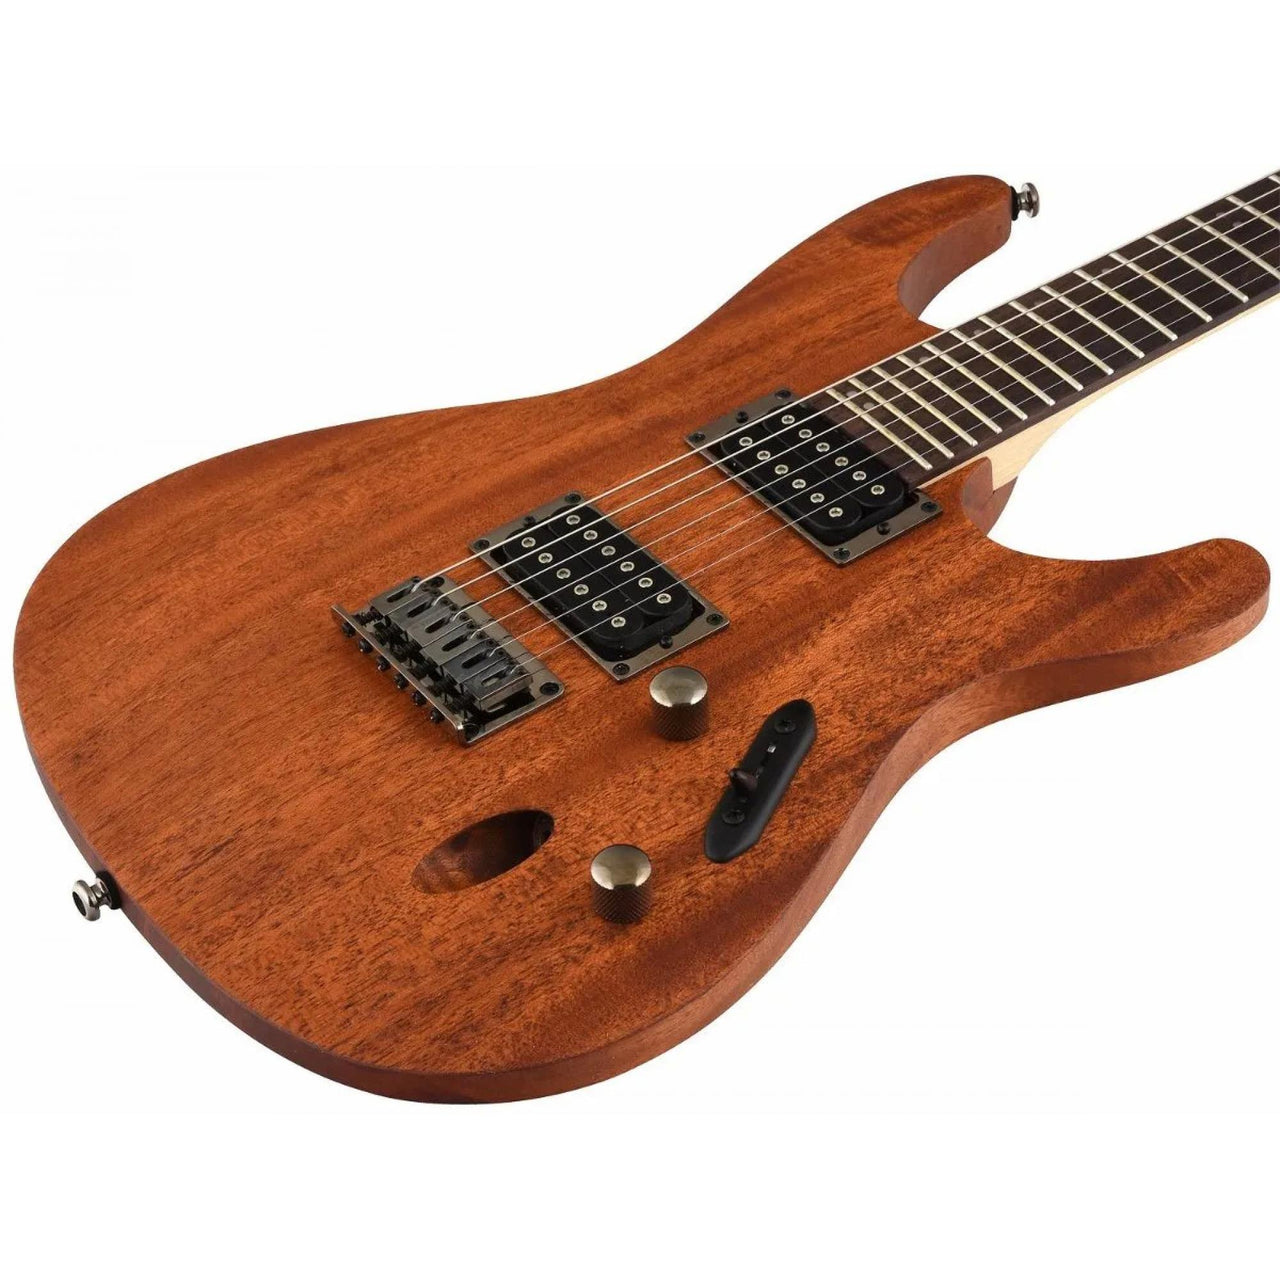 Guitarra Ibanez S521-mol Serie S Electrica Caoba Mate